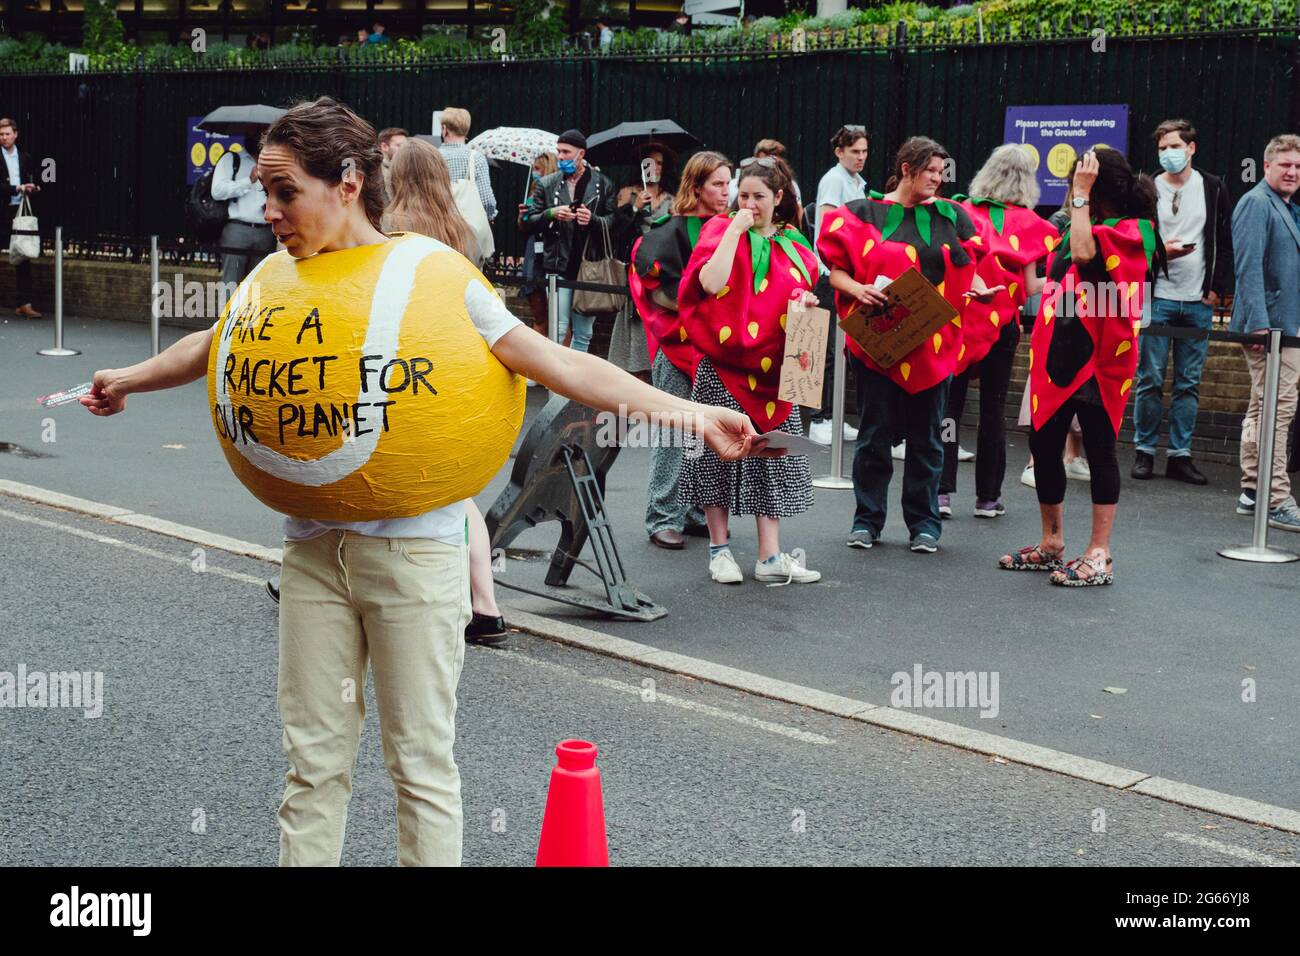 London, UK. 2nd July, 2021. A group of activists with giant tennis balls, rackets, headbands and tennis gear and suited as bankers protest outside the Wimbledon arena this year's Wimbledon tournament is sponsored by HSBC, who are responsible for funding £81bn-worth of fossil fuels since the Paris Climate Agreement of 2015. Credit: João Daniel Pereira Stock Photo